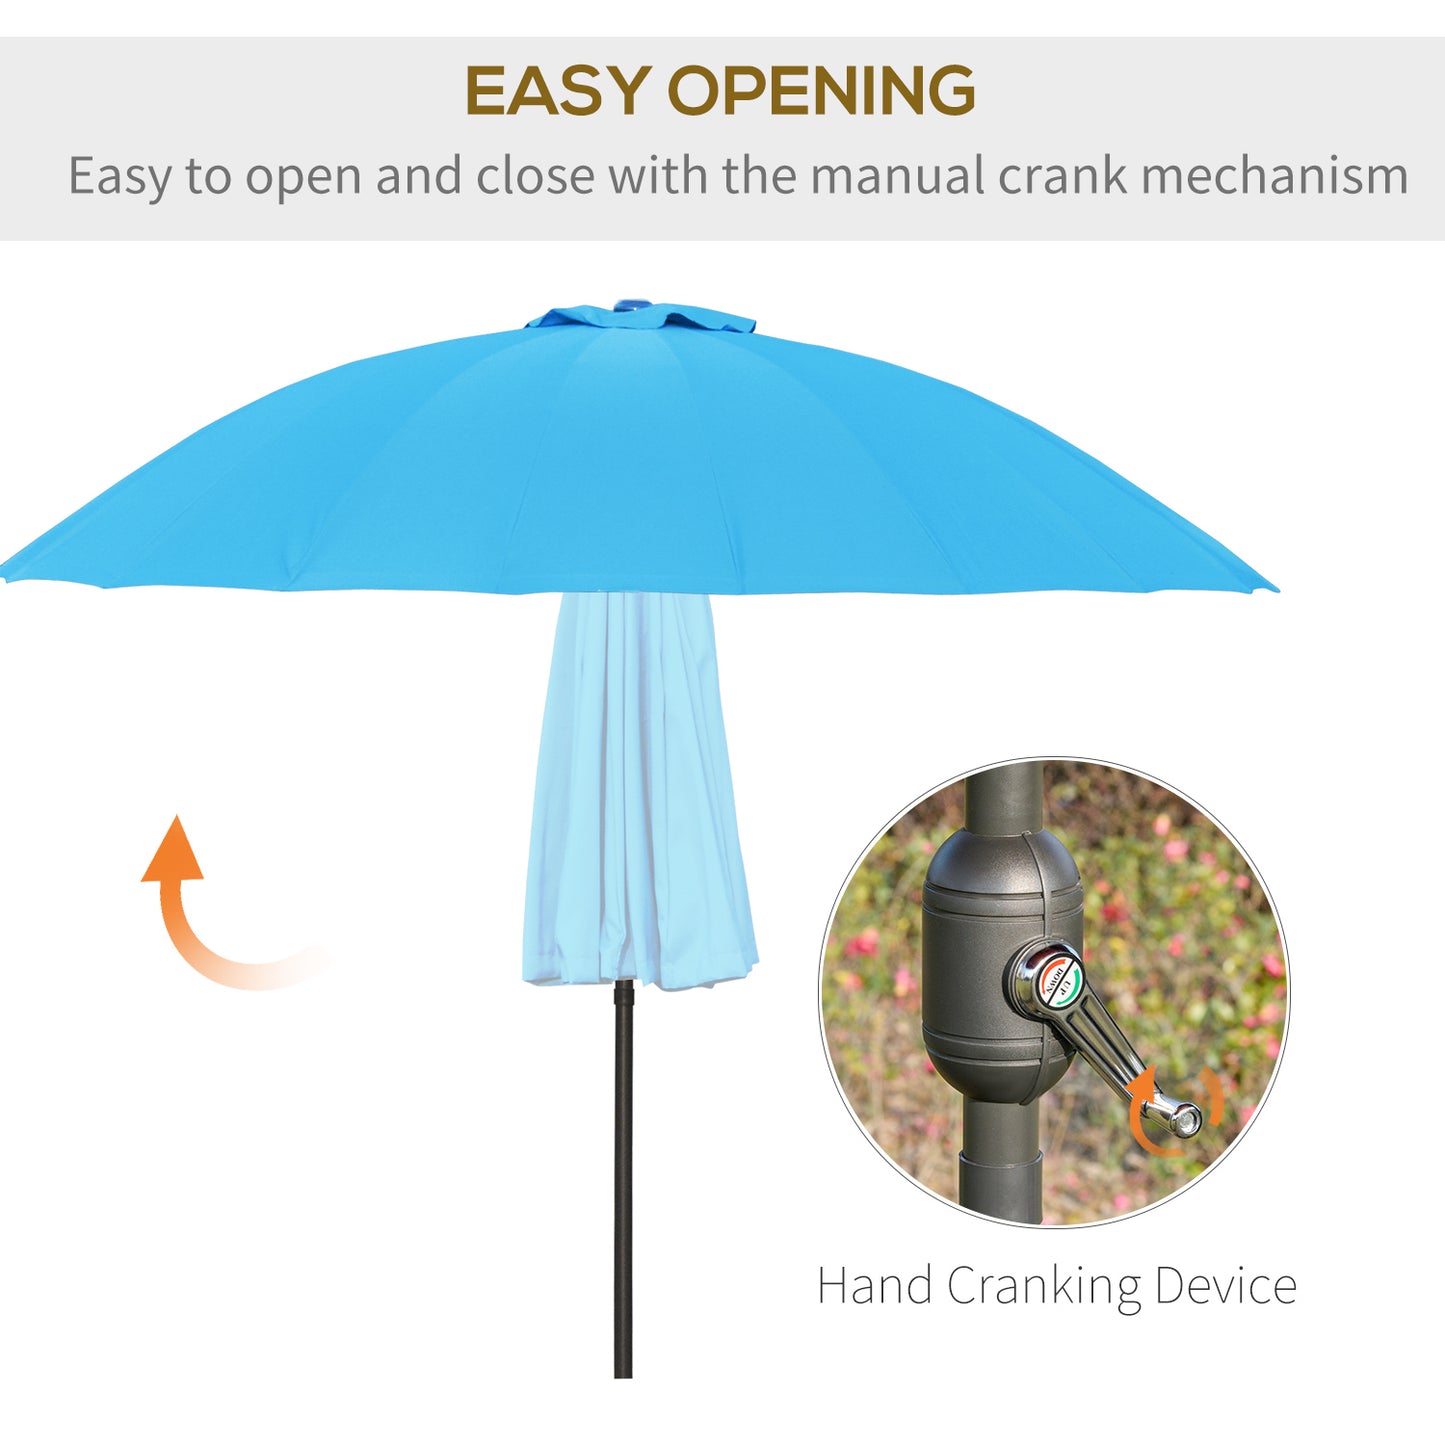 Outsunny Ф255cm Patio Parasol Umbrella Outdoor Market Table Parasol with Push Button Tilt Crank and 18 Sturdy Ribs for Garden Lawn Backyard Pool Blue Adjustable Angle Detachable Structure